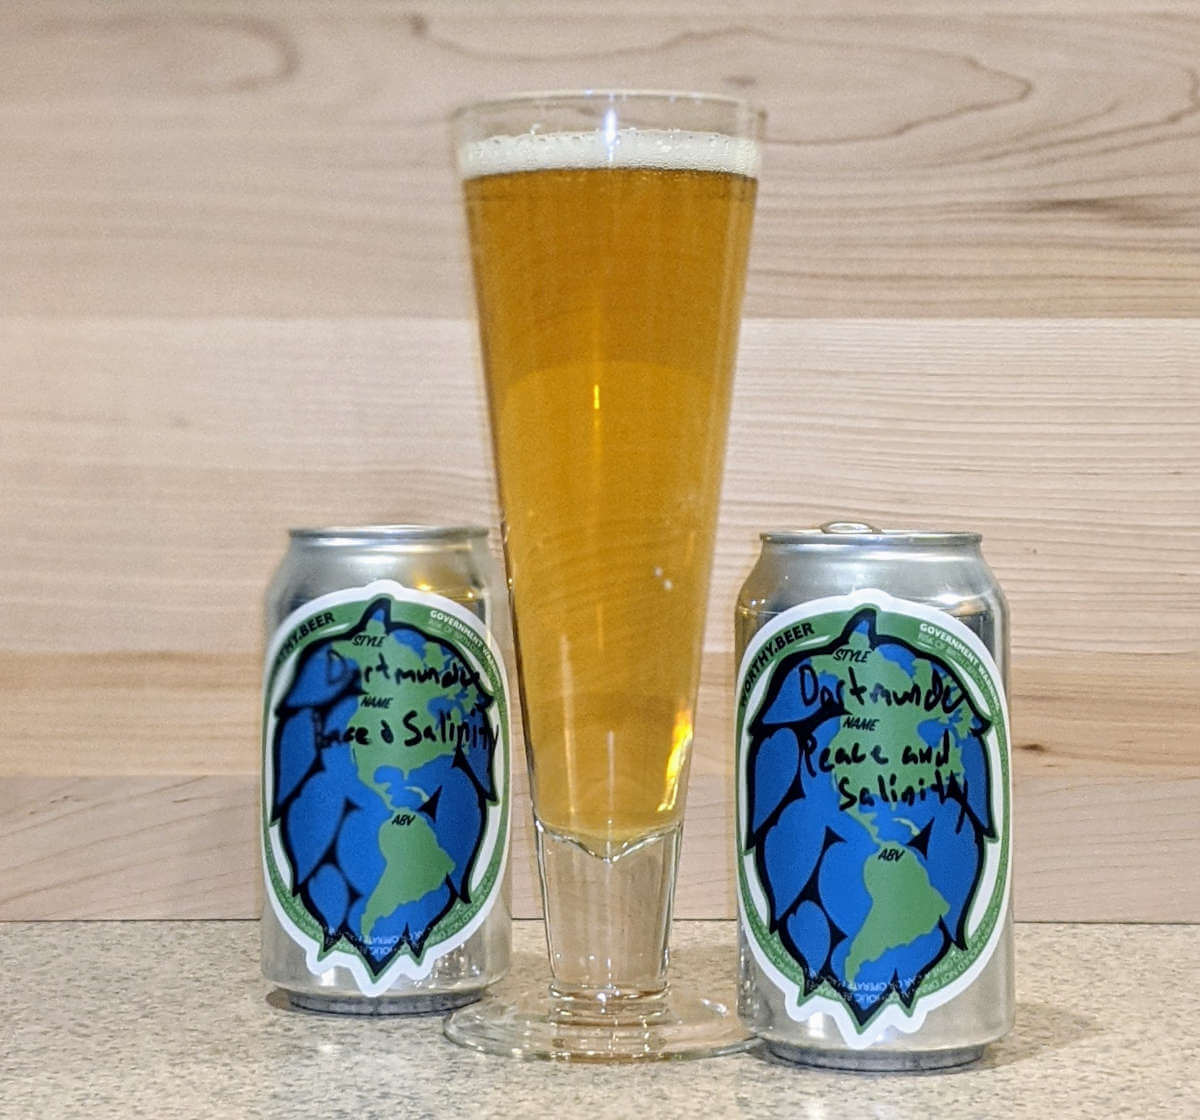 Latest print article: Worthy’s Peace and Salinity Lager, with smoky malt